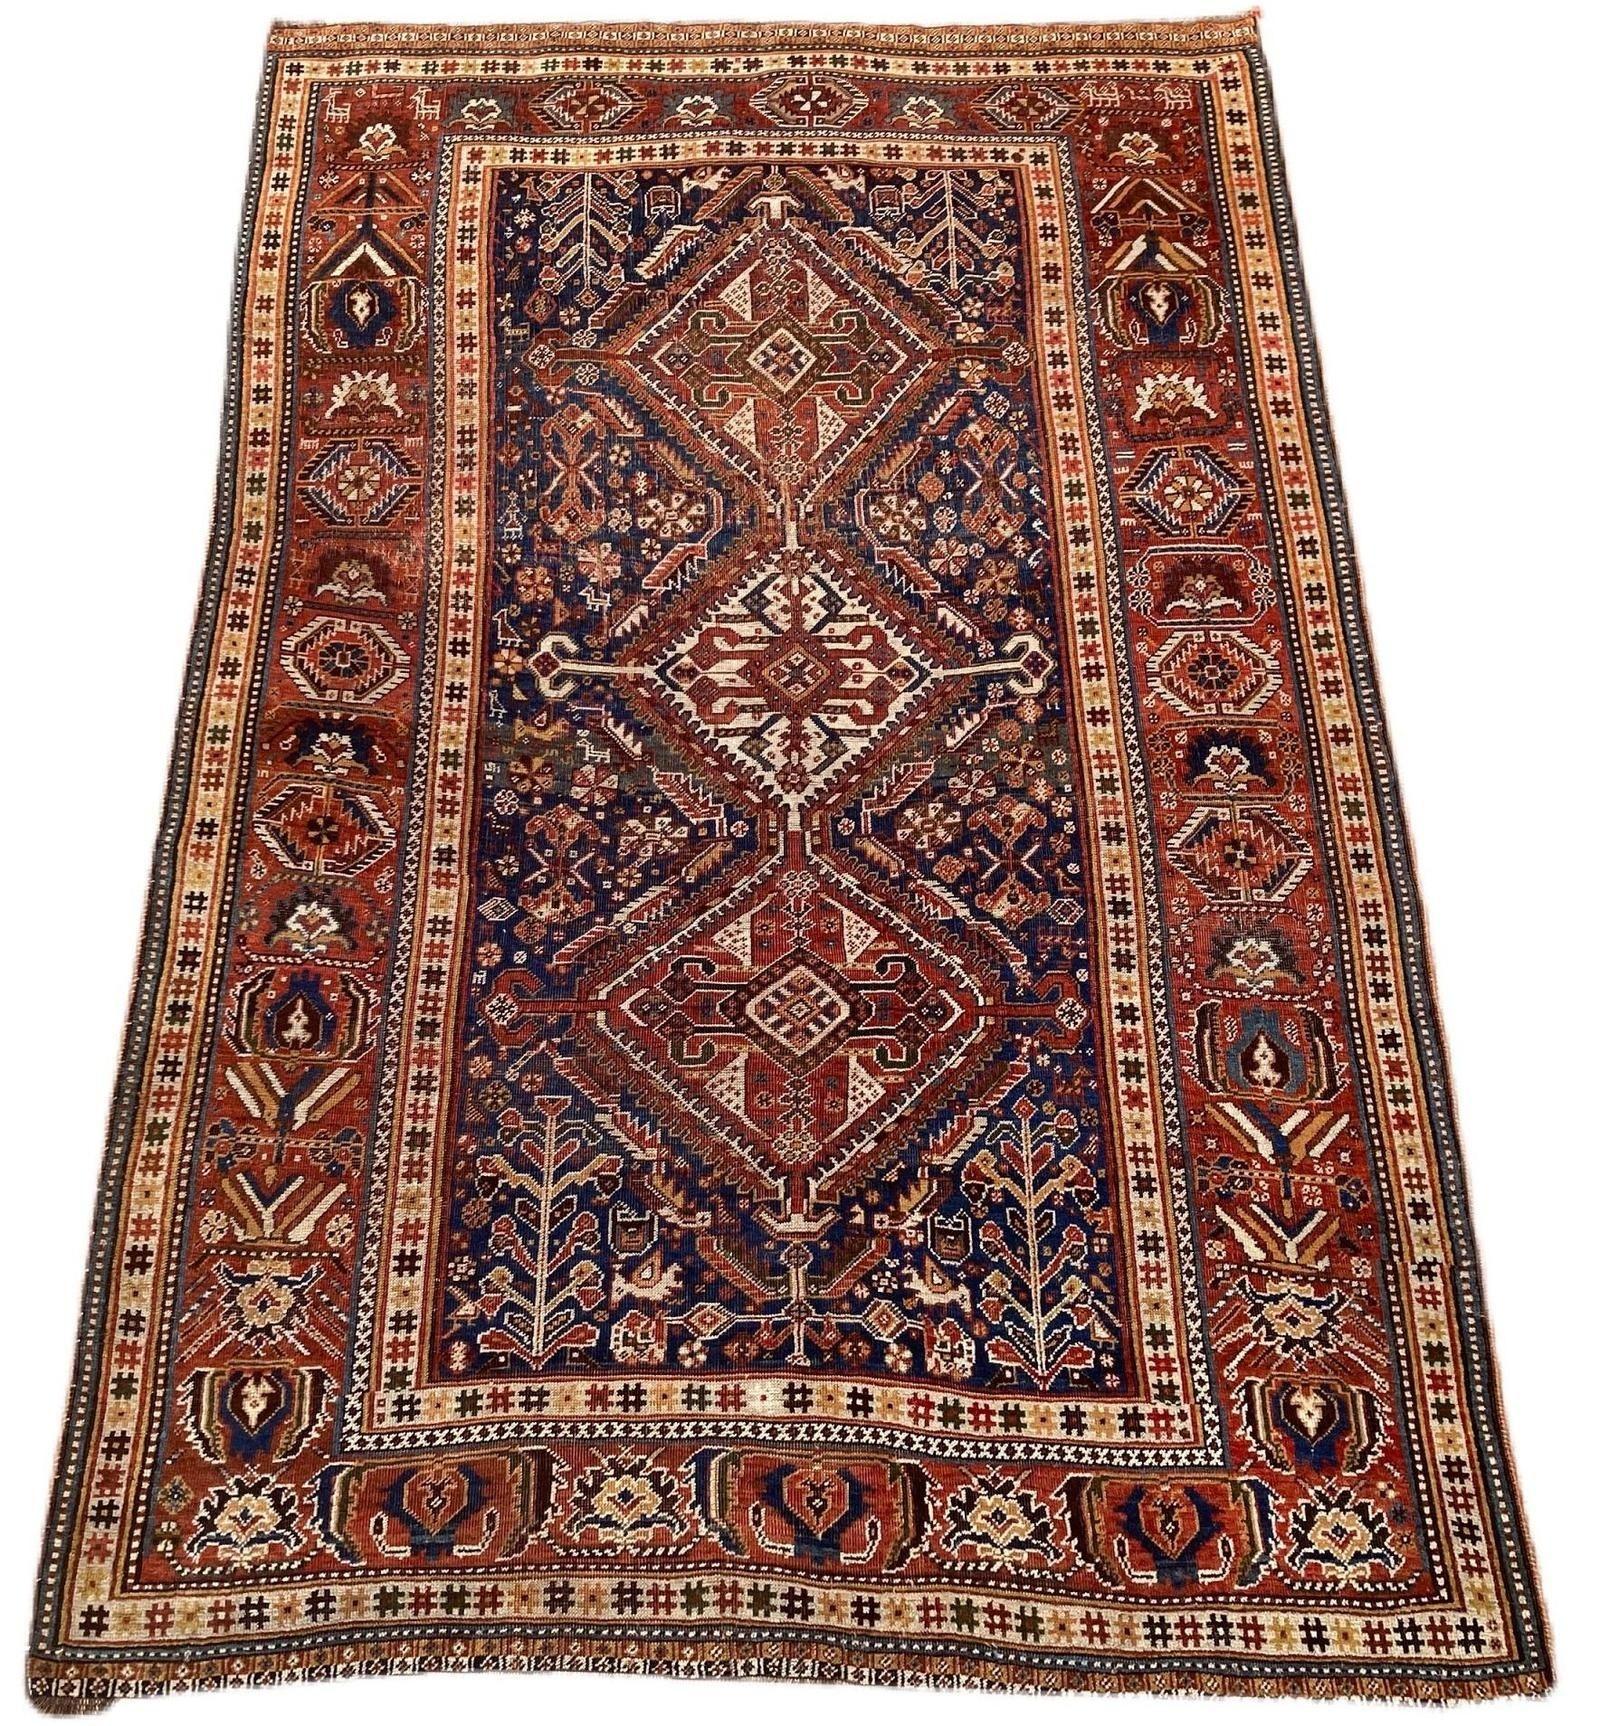 A fabulous antique Qashqai rug, handwoven by the eponymous nomadic tribe circa 1900 with a geometrical 3 medallion design on an indigo field and great secondary colours. Note the small figures throughout the field (see photos).
Size: 2.36m x 1.60m